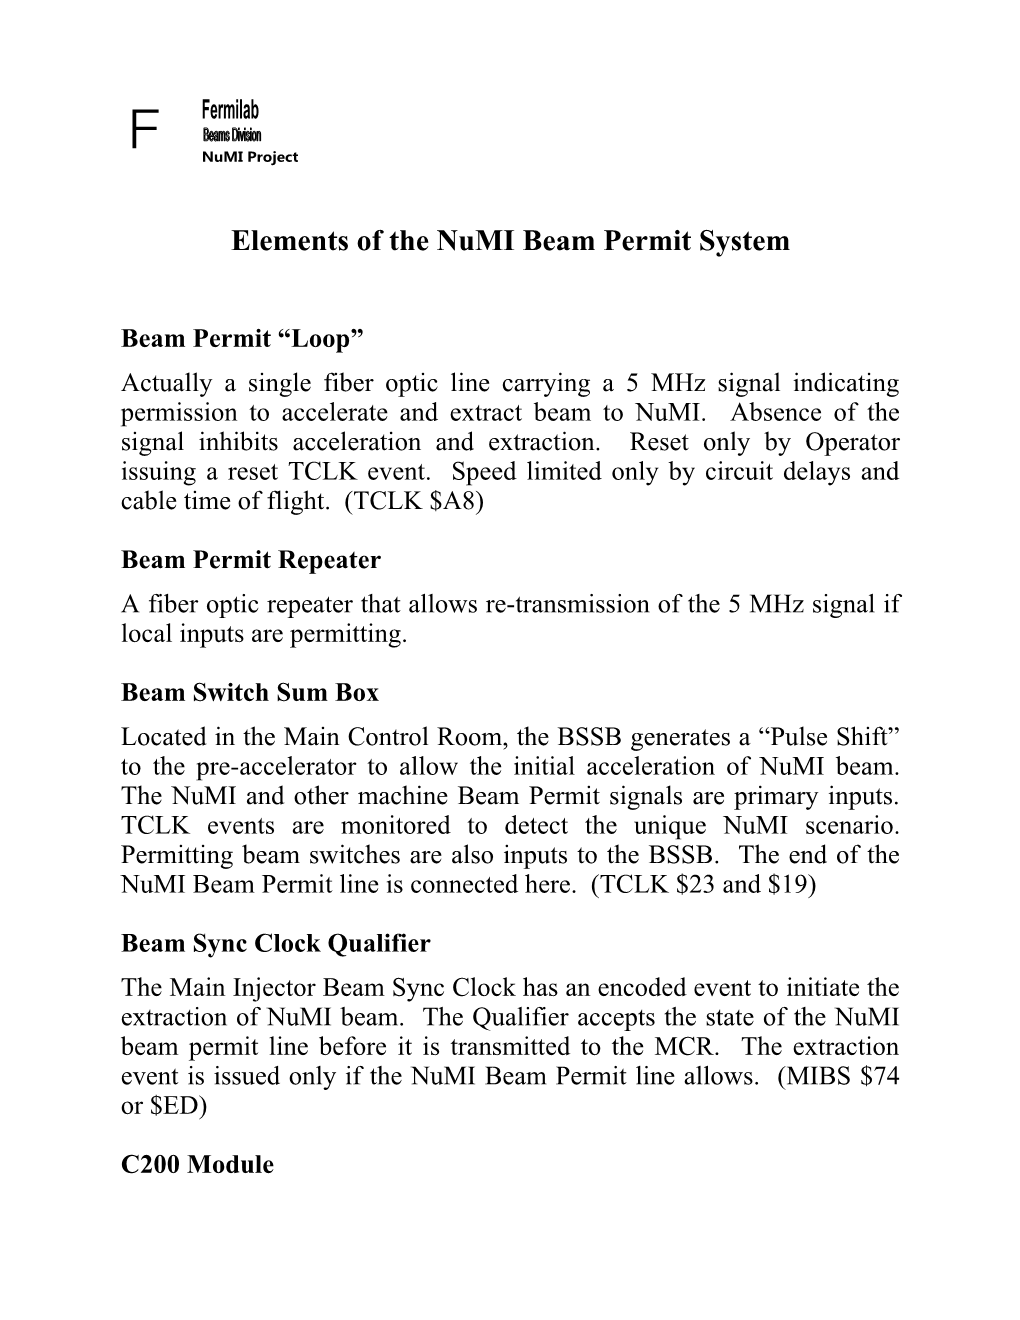 Elements of the Numi Beam Permit System